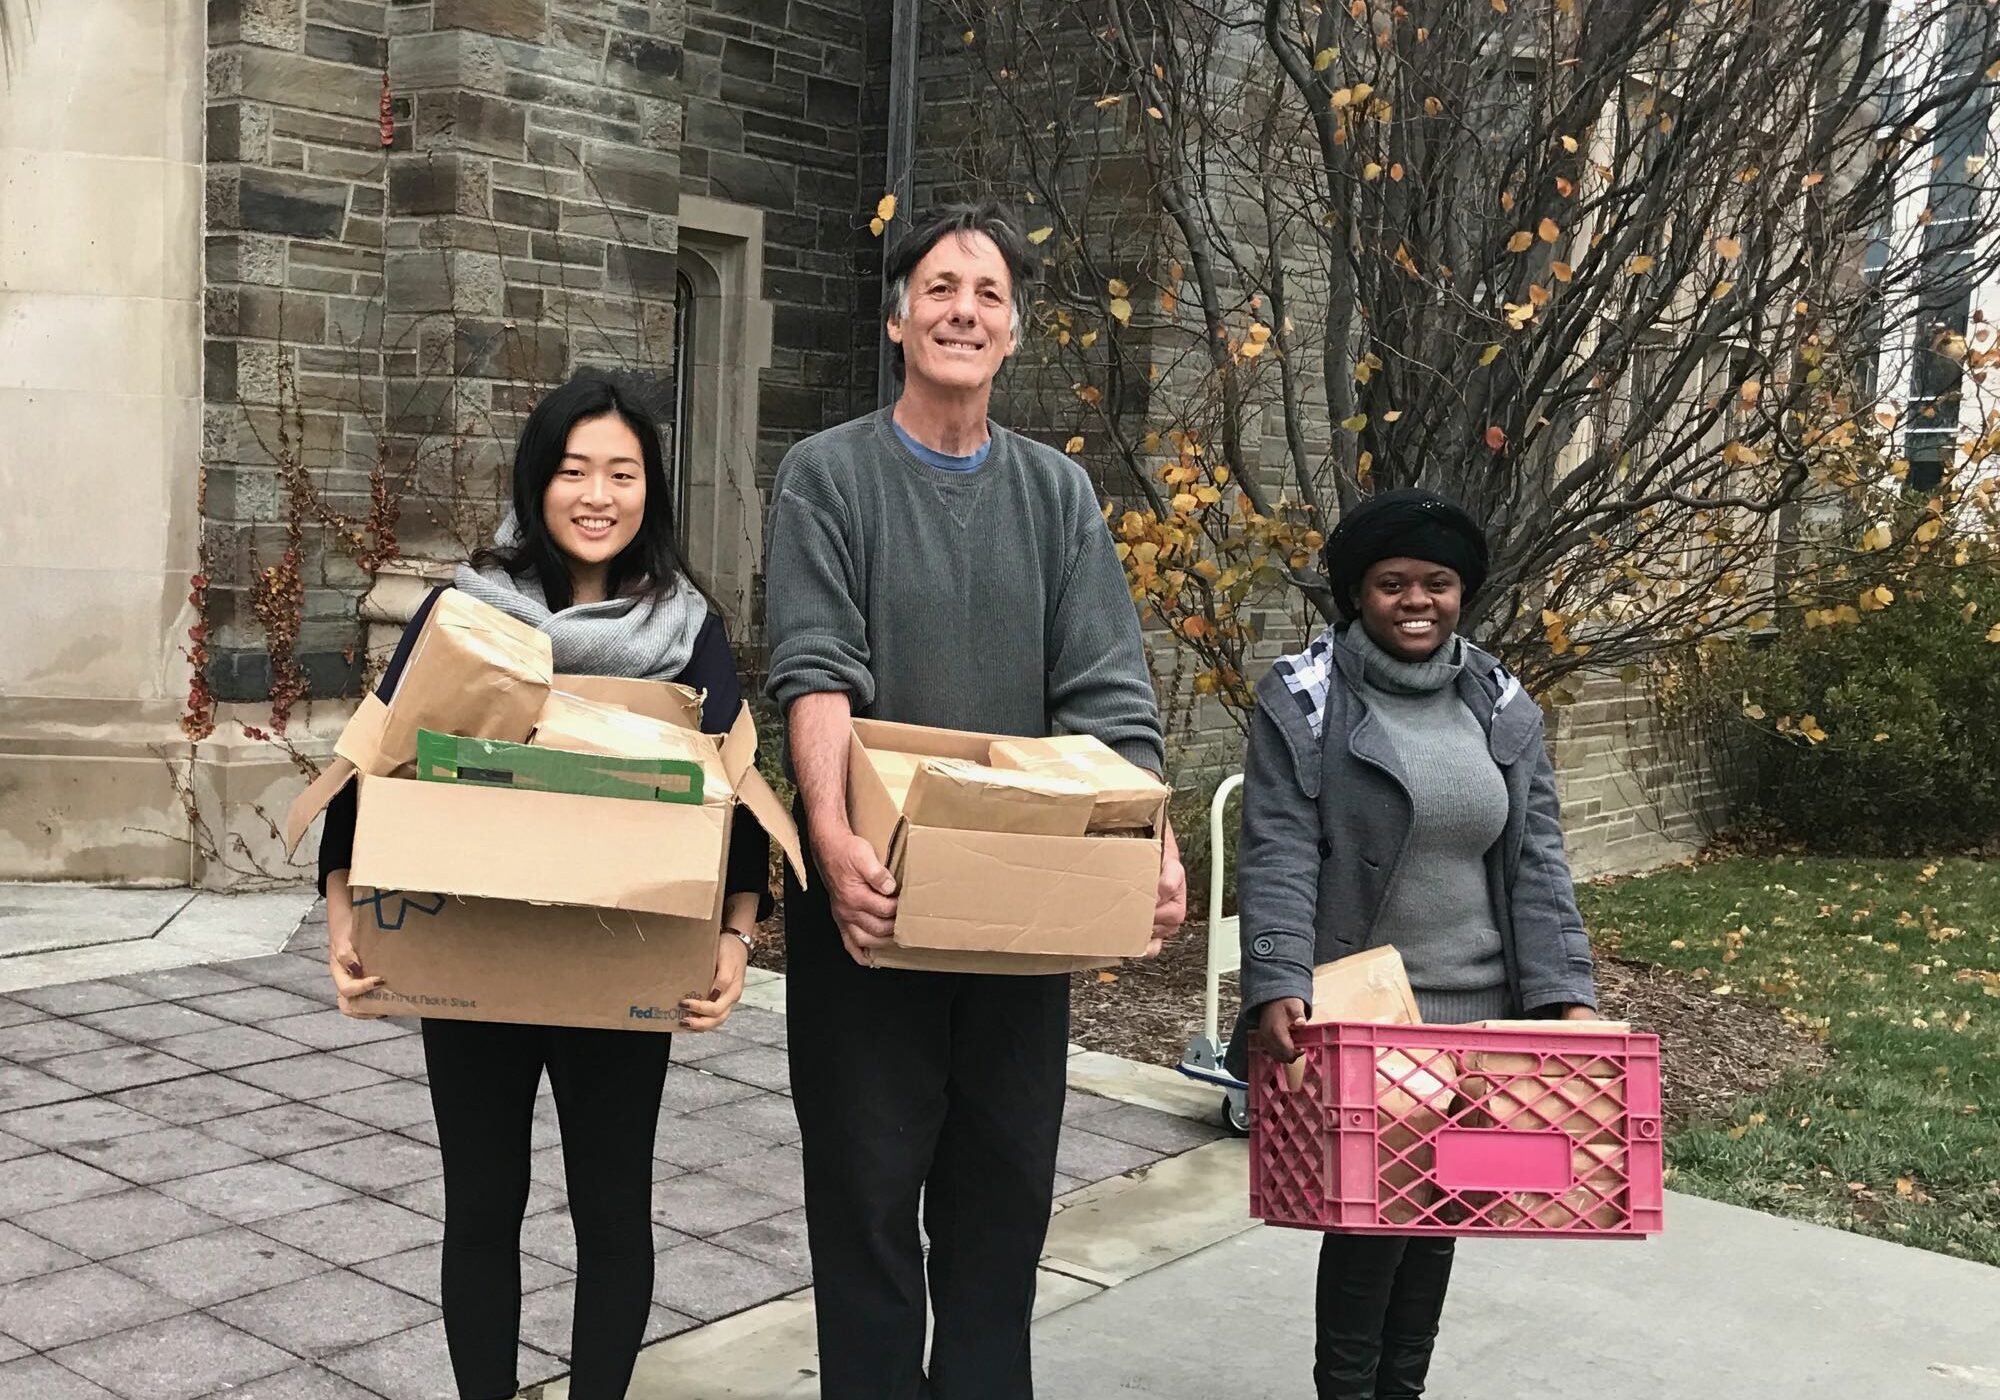 Clara, Gary, Yvette bringing packages to the post office